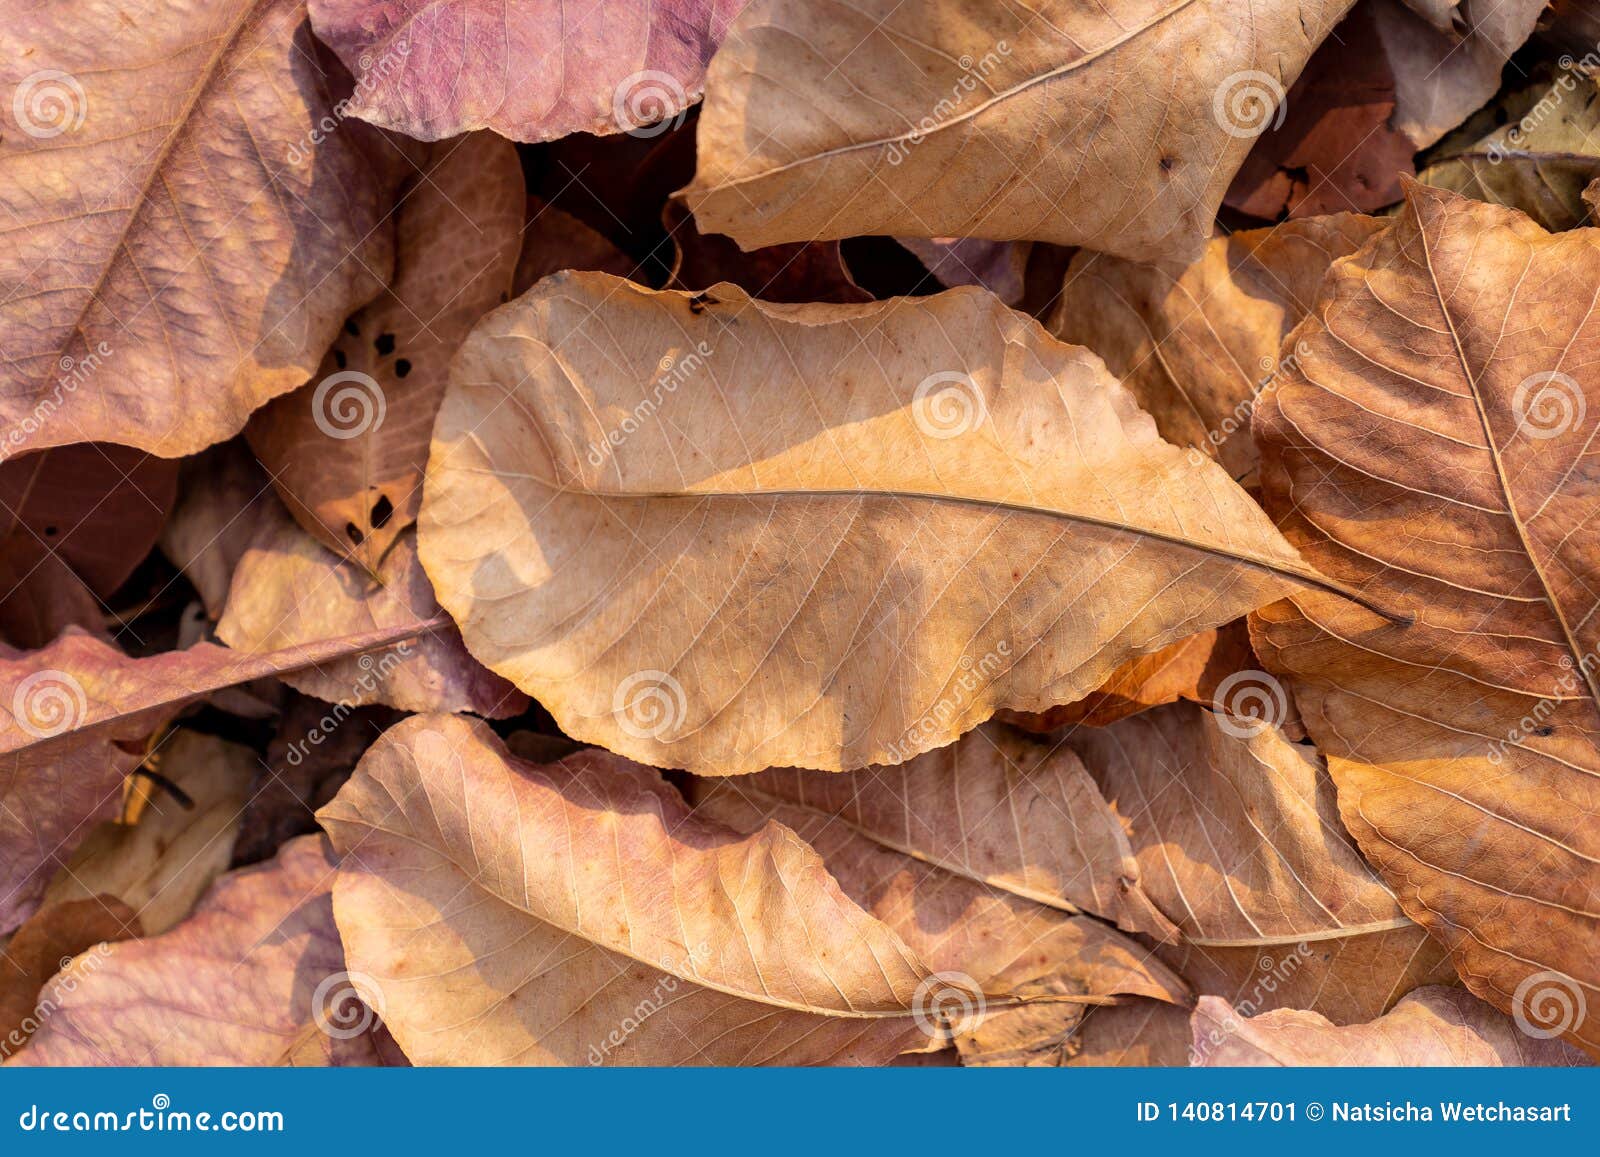 Pile of Fallen Autumn Dried Leaves for Background Stock Image - Image of  maple, heap: 140814701